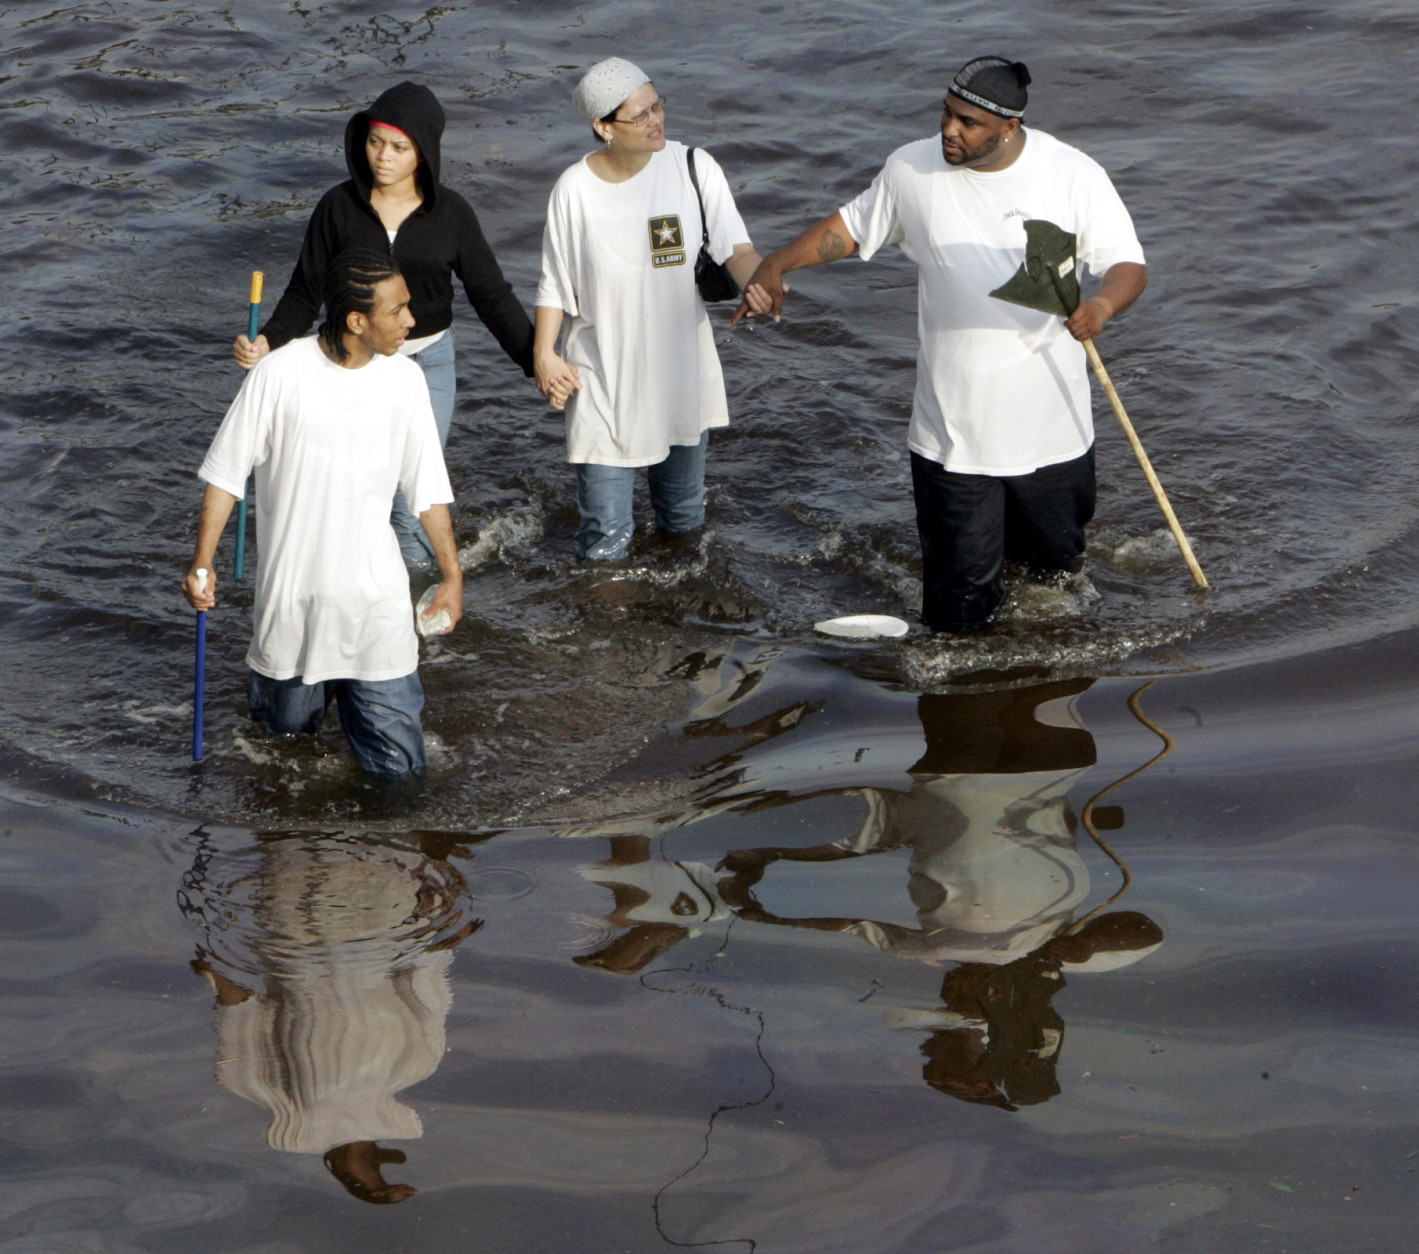 New Orleans residents walk through floodwaters that besiege the Crescent City on Tuesday, Aug. 30, 2005. Hurricane Katrina devastated the Louisiana and Mississippi coasts when it came ashore on Monday. (AP Photo/Bill Haber)